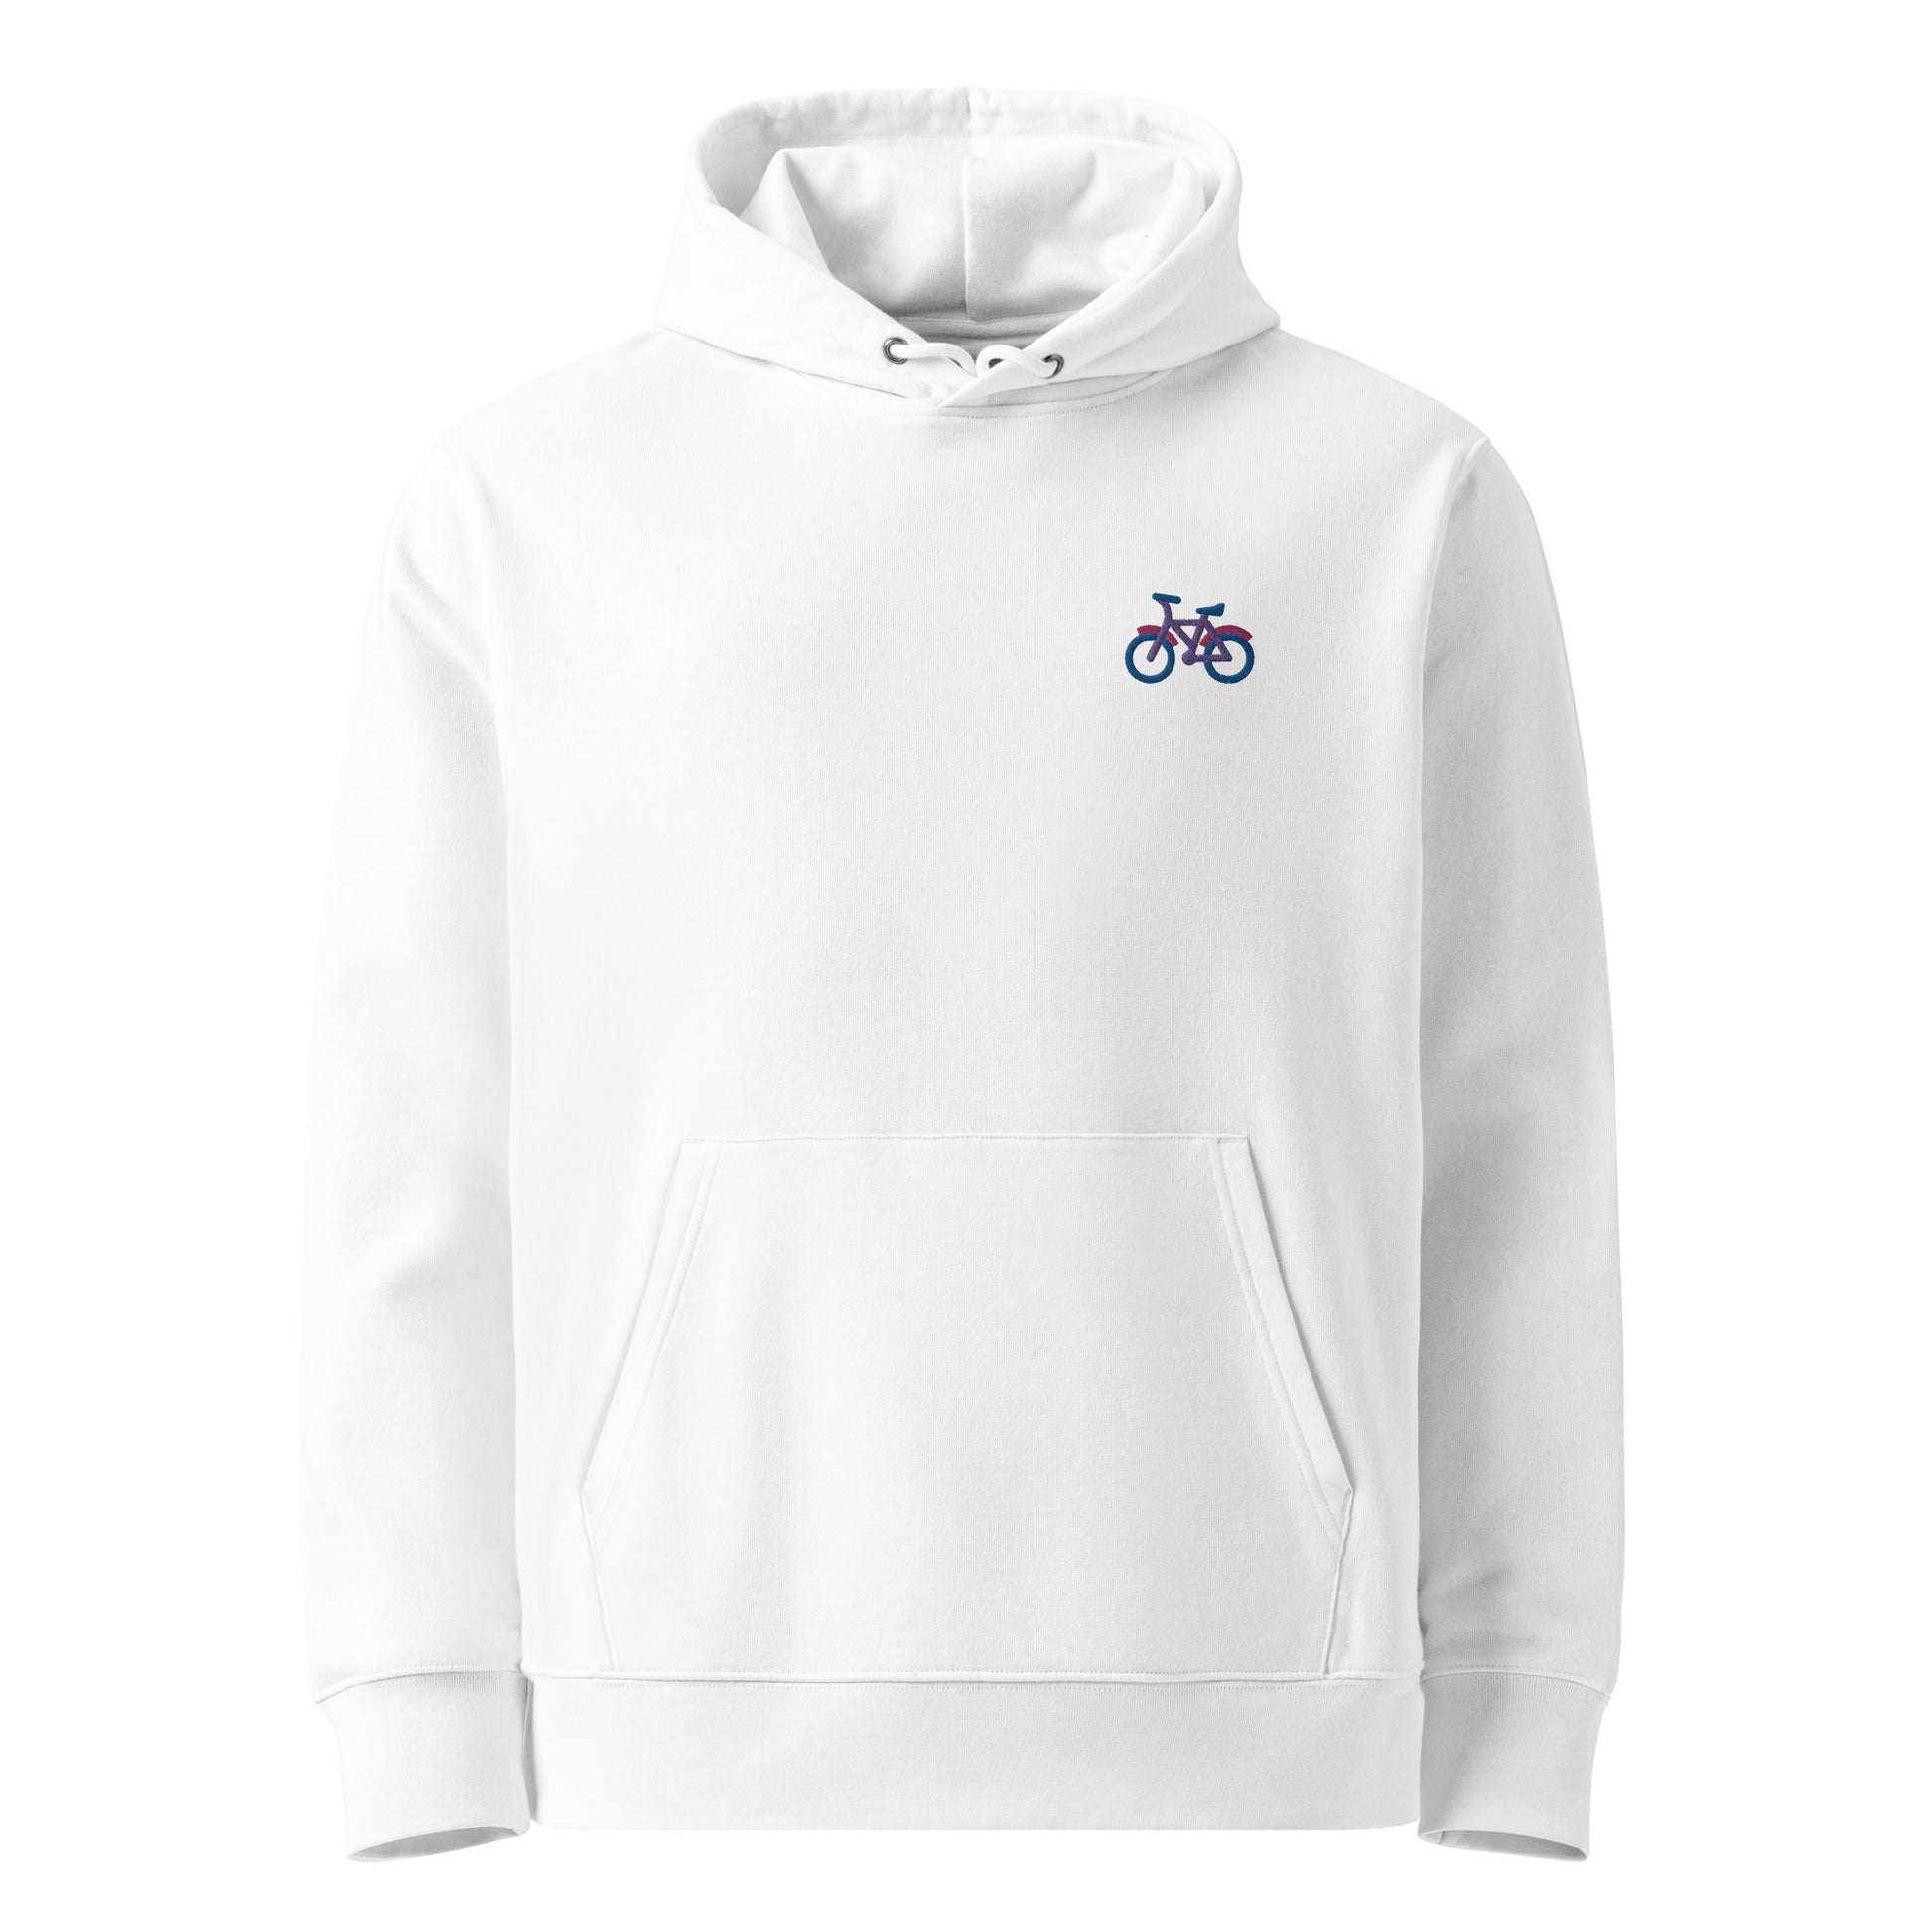 Unisex eco-friendly white hoodie featuring on the upper left chest; a subtle embroidered bicycle in bisexual colors, adding a touch of lgbtq to your outfit by putting the bi in bicycle. sizes: small, medium, large, extra large, double extra large.